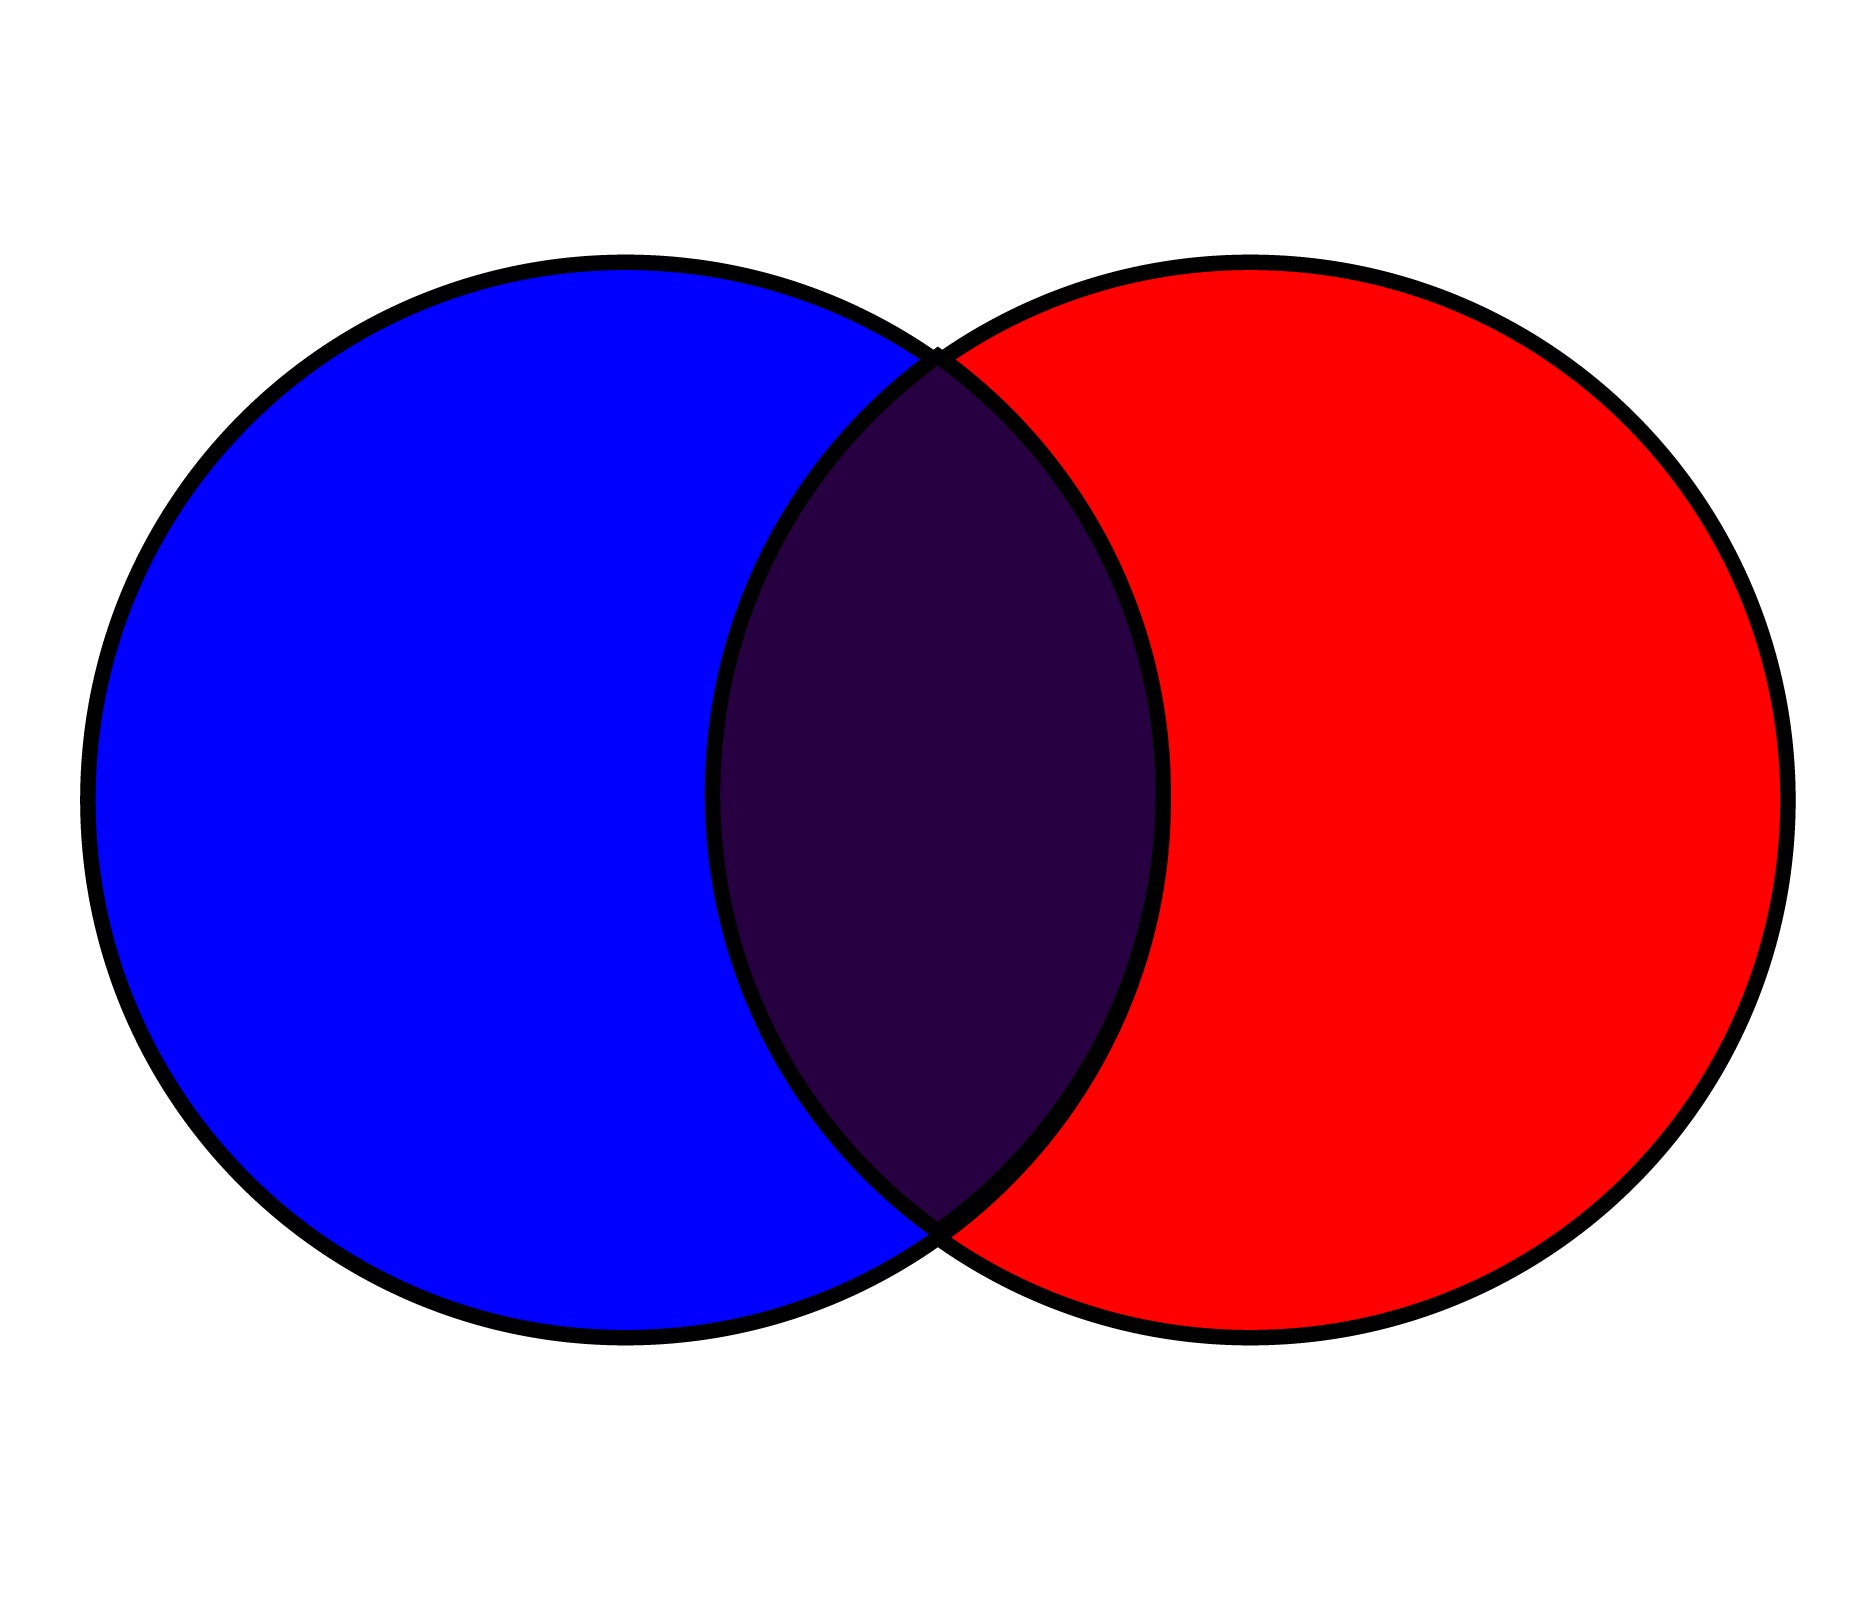 What Color Does Red And Blue Make?